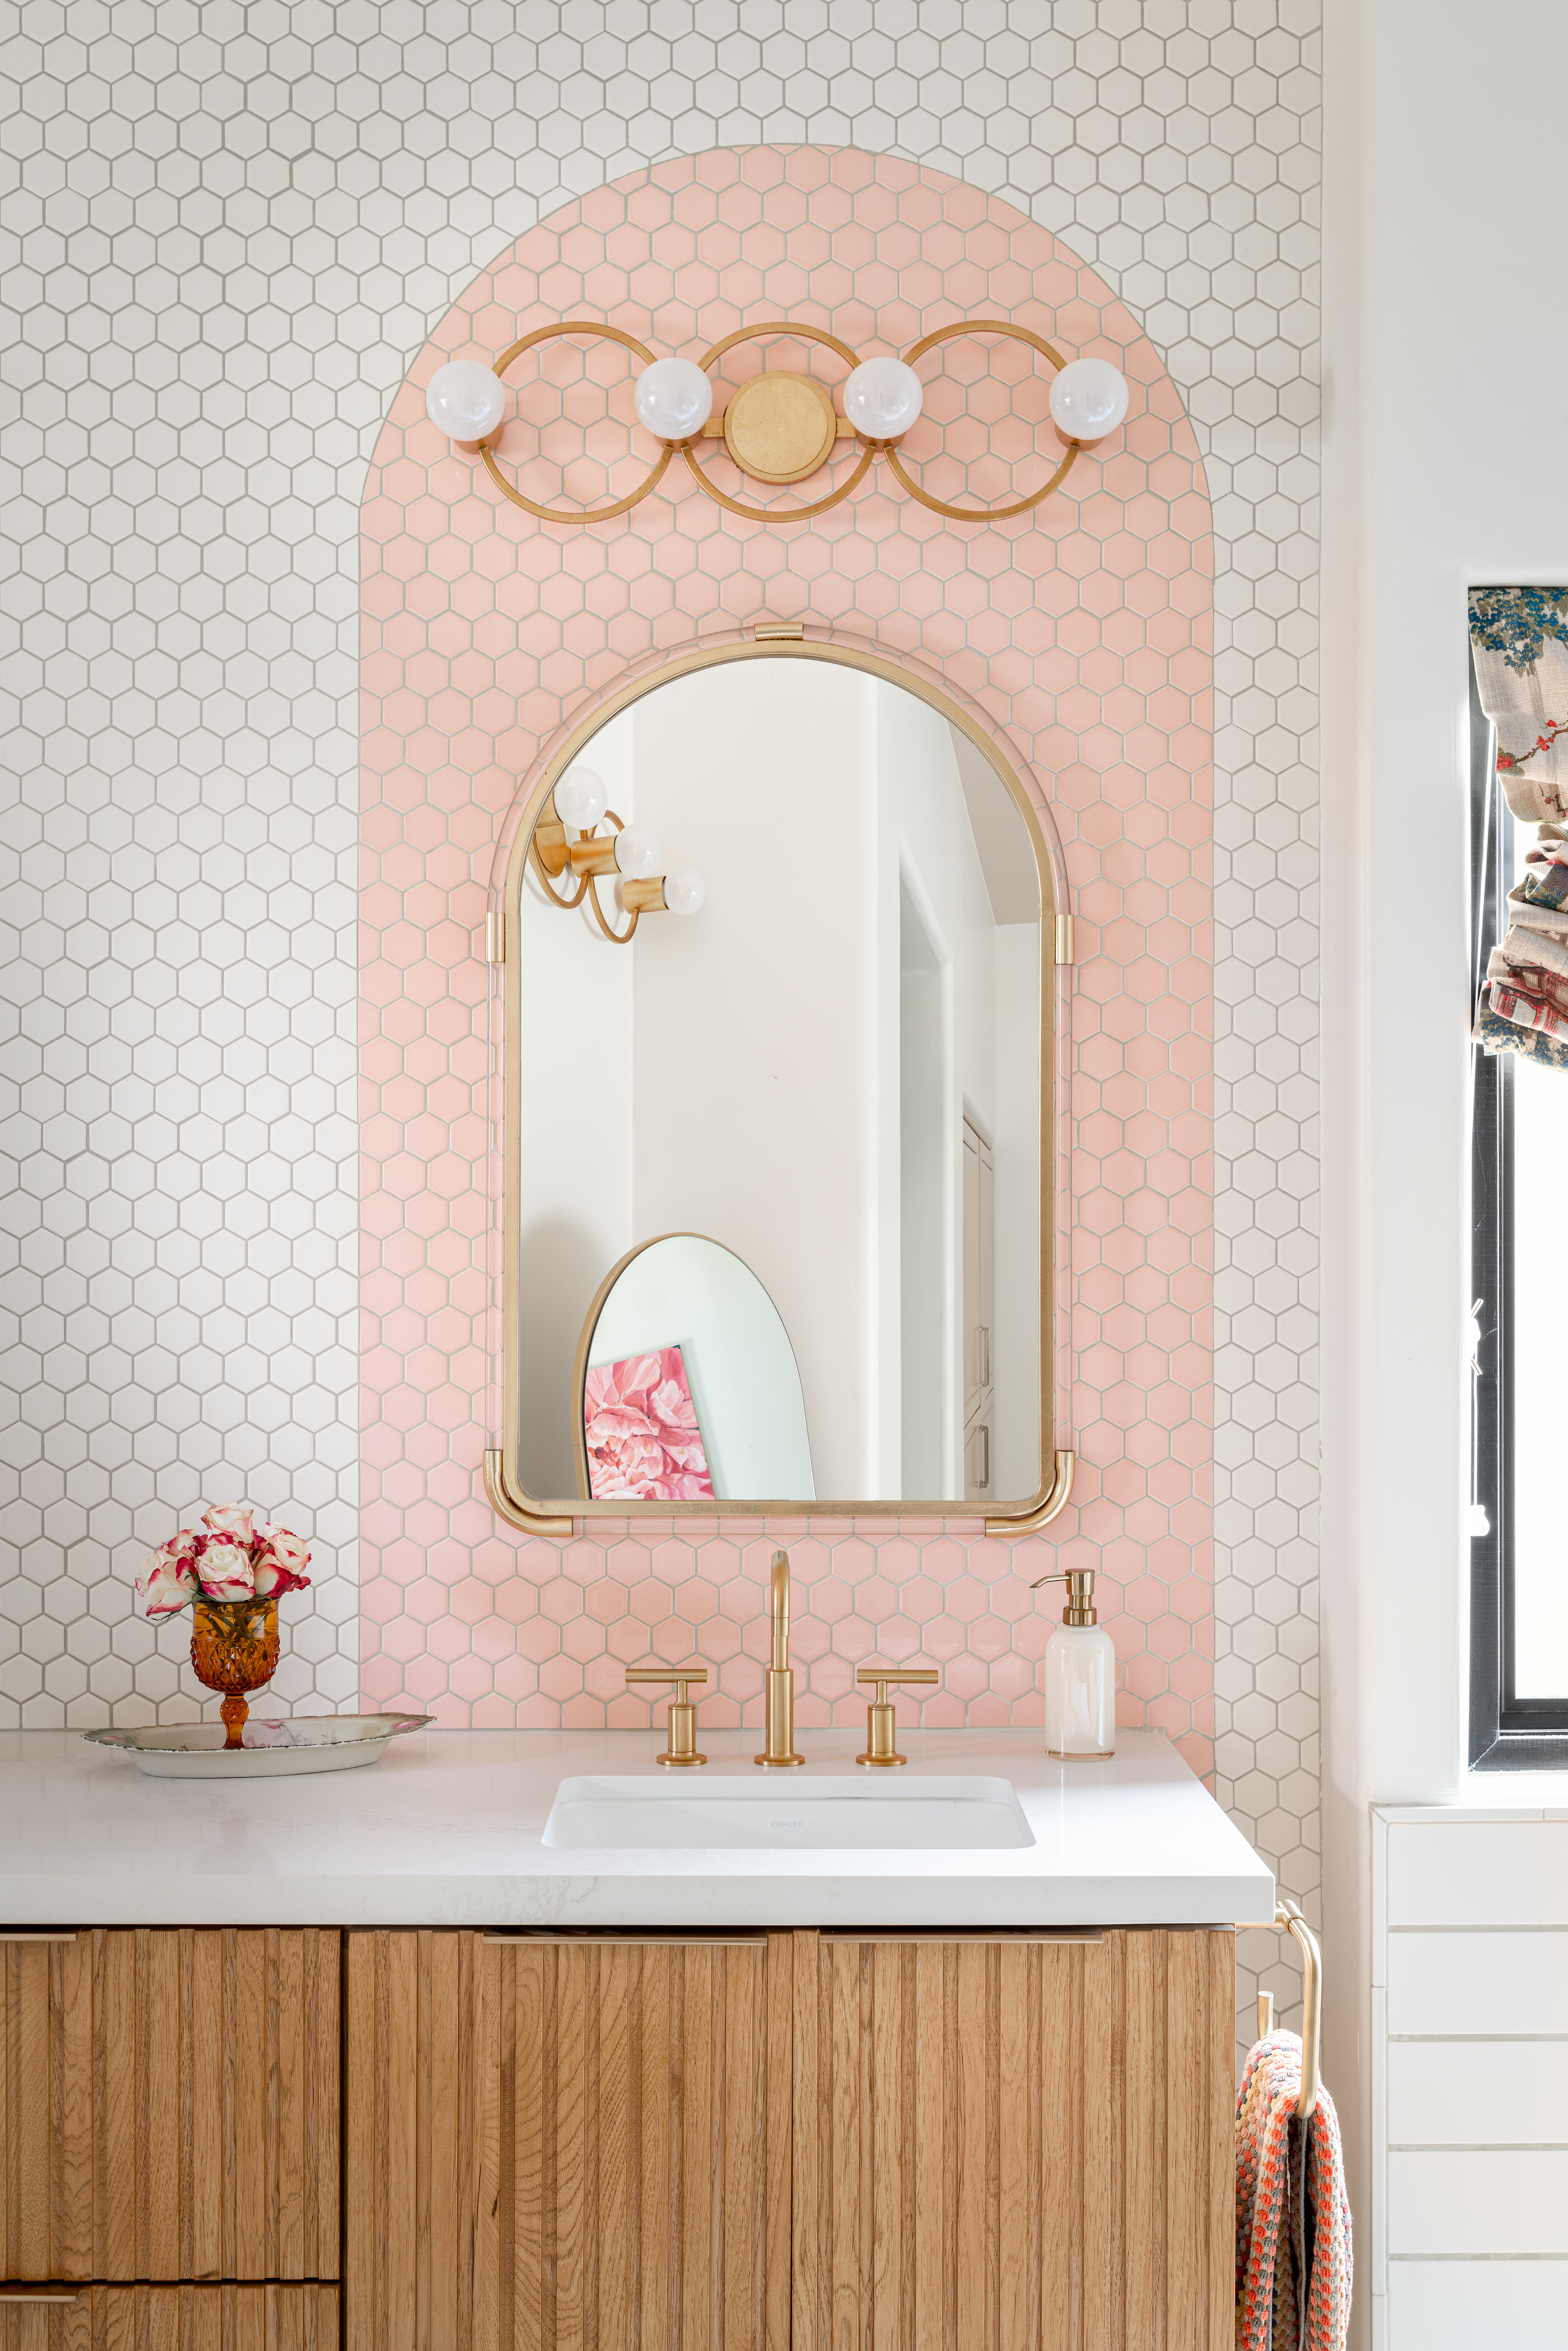 Art deco bathroom with fluted wood vanity and pink tiled arches above sink